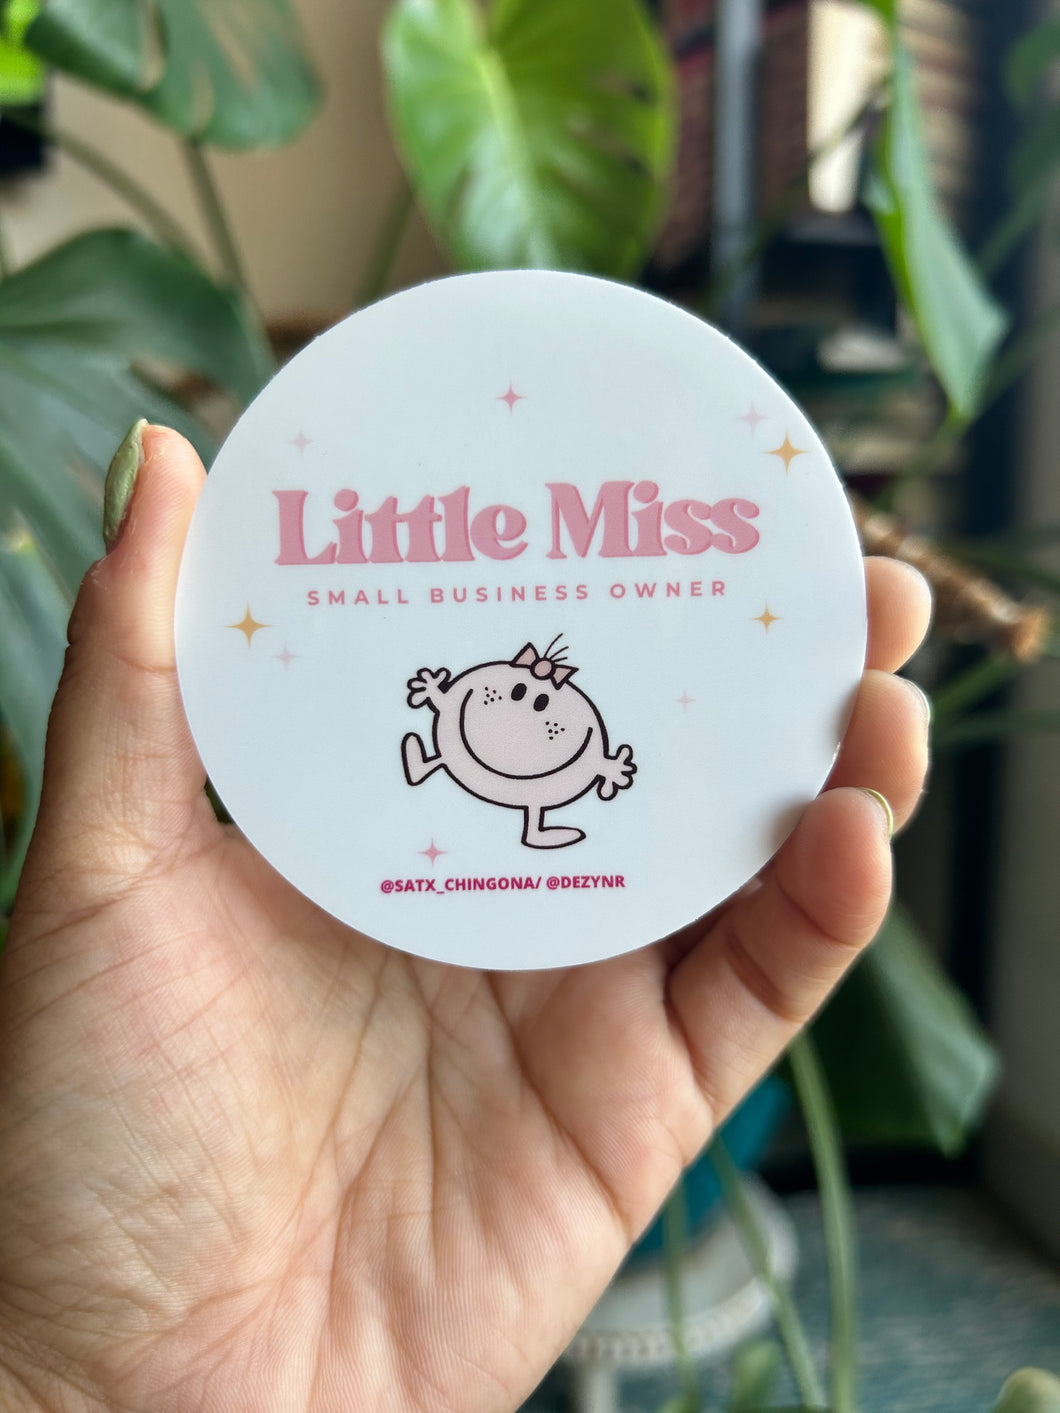 Little Miss Small Business Owner sticker